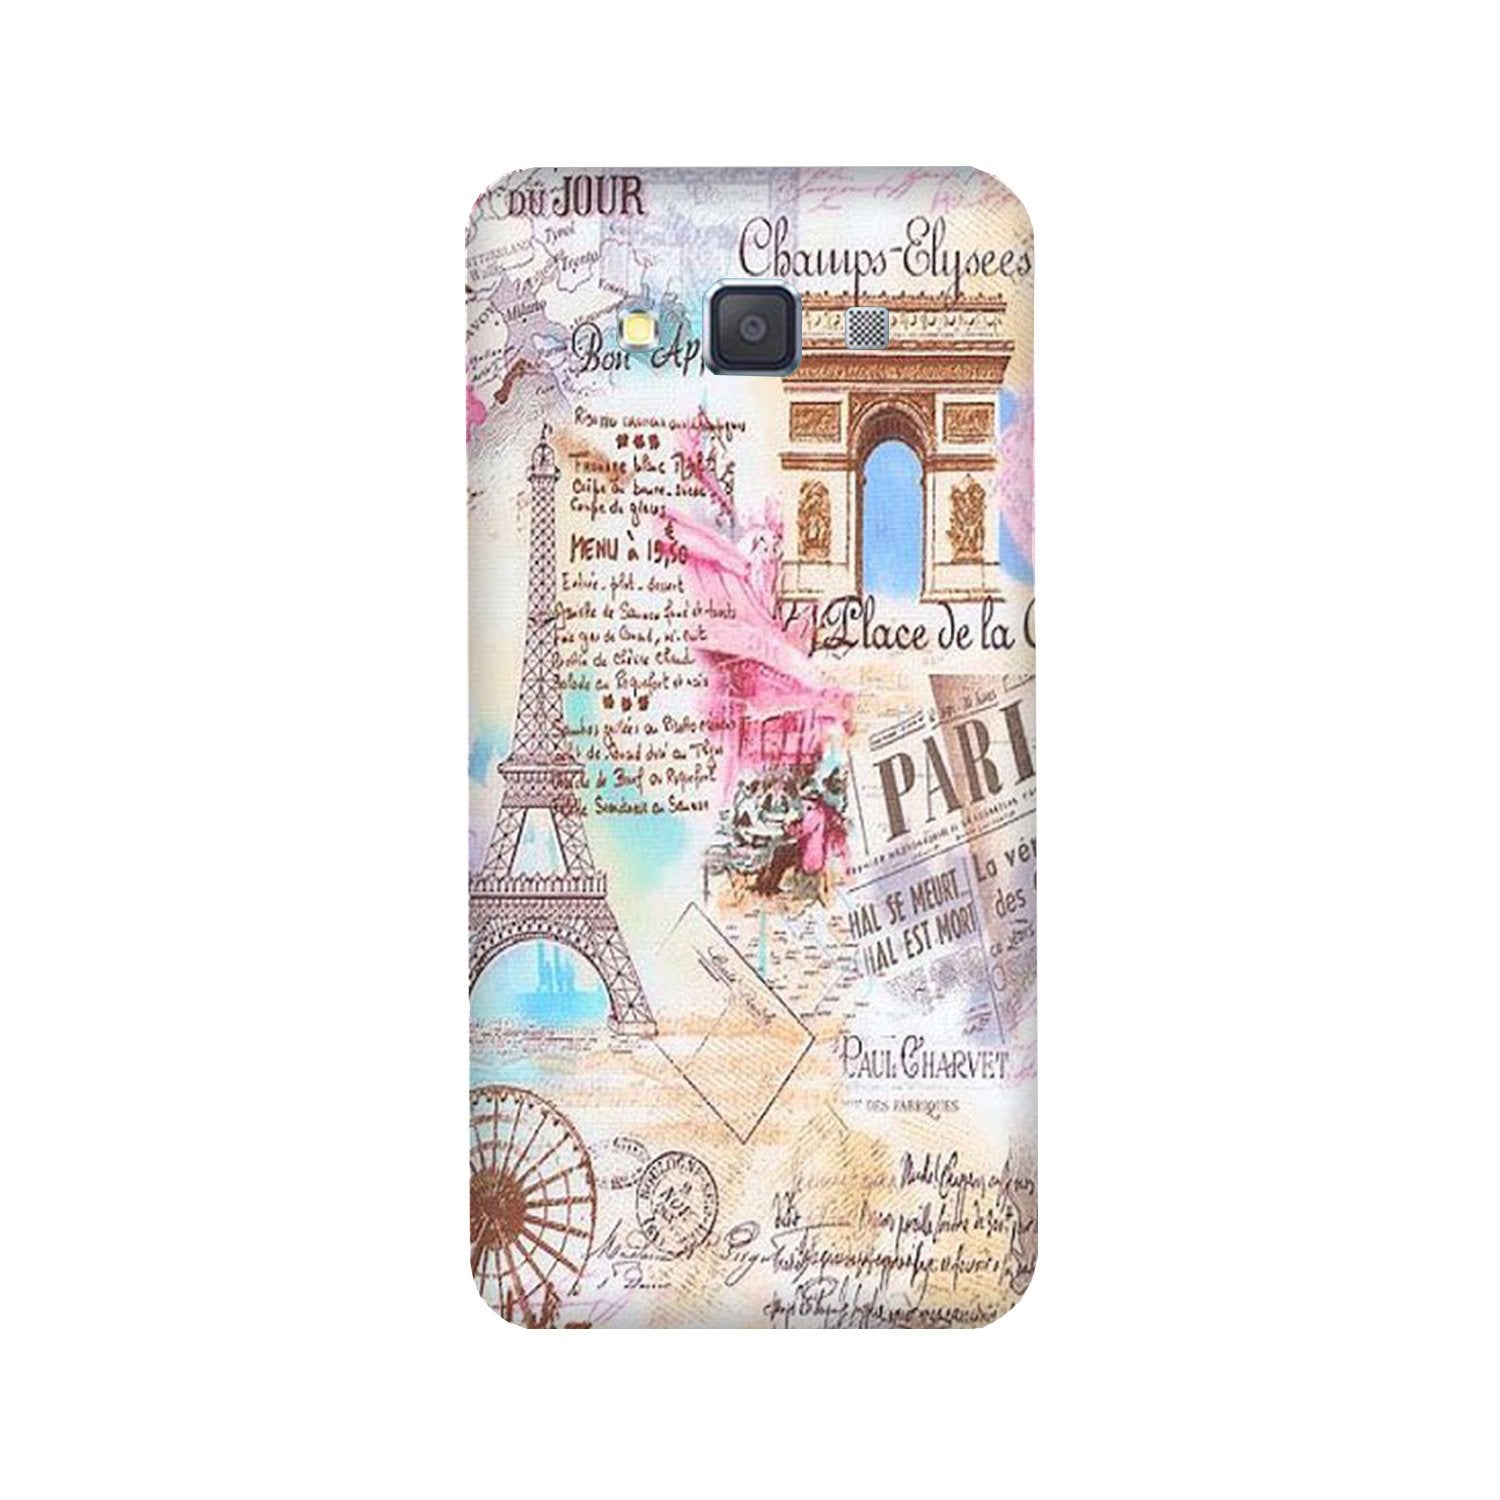 Paris Eiftel Tower Case for Galaxy ON7/ON7 Pro